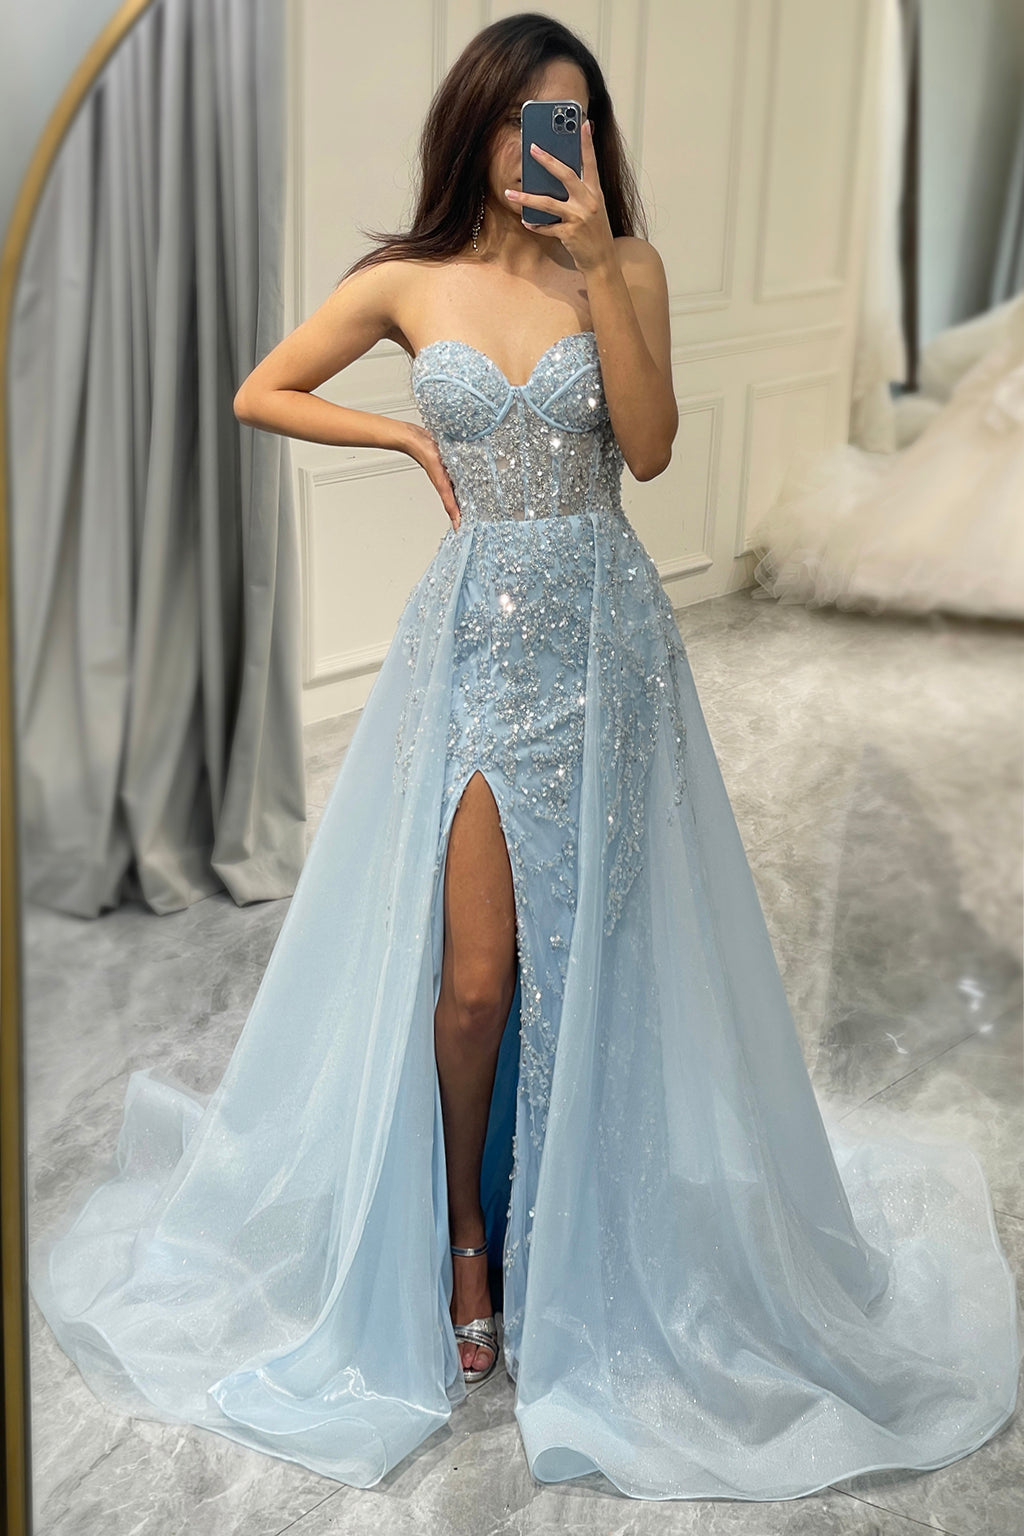 WEDTREND Women Sparkly Prom Dress Light Blue A Line Sweetheart Long Evening  Party Dress With Sequins